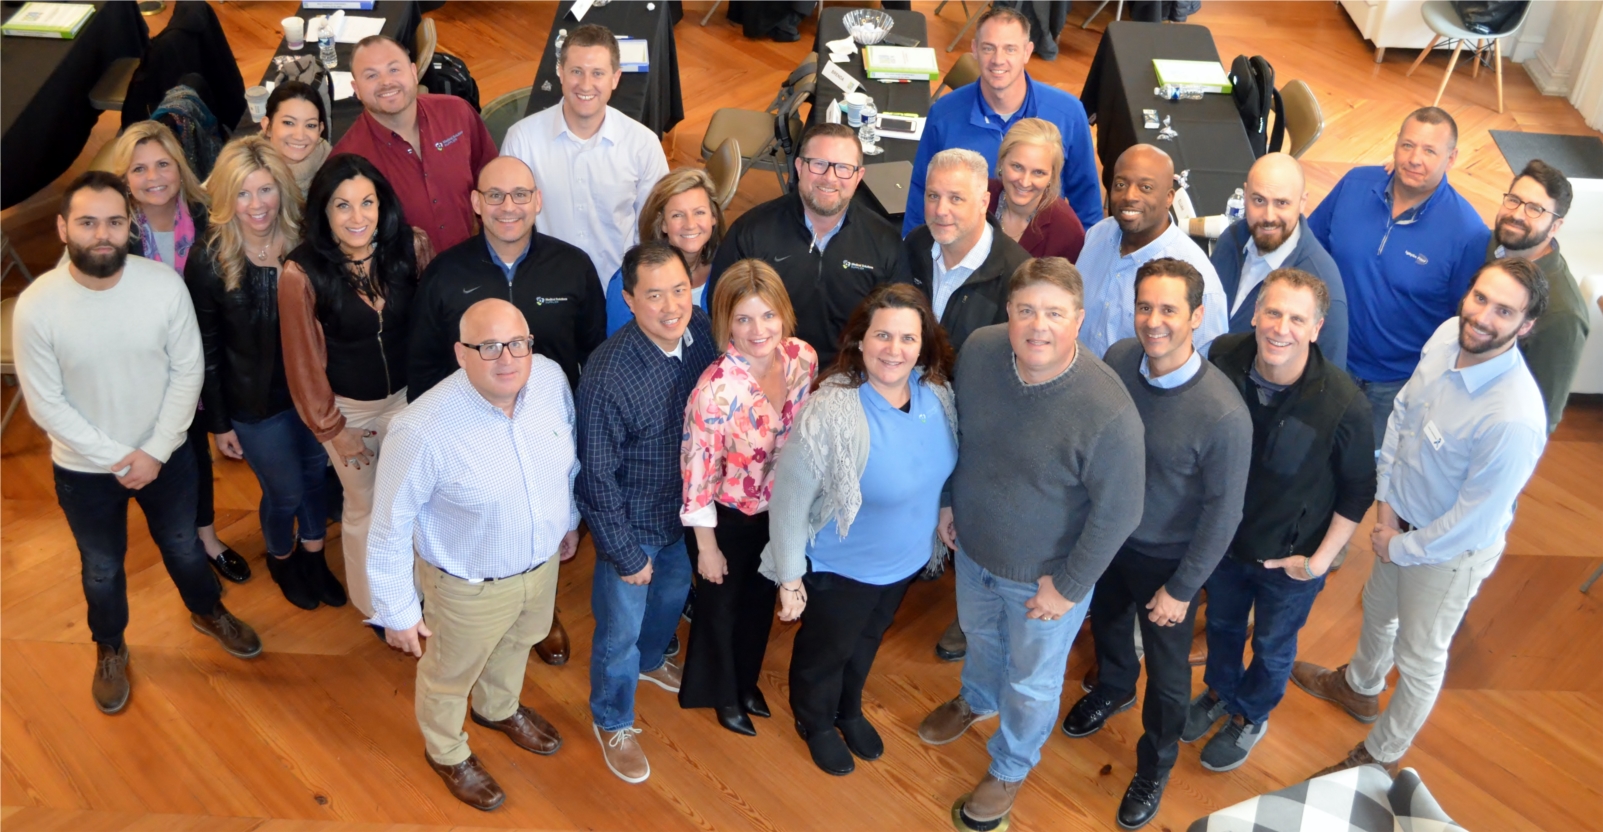 Our Sales Team gathers each January to set goals and align with the Company's vision for the coming year.